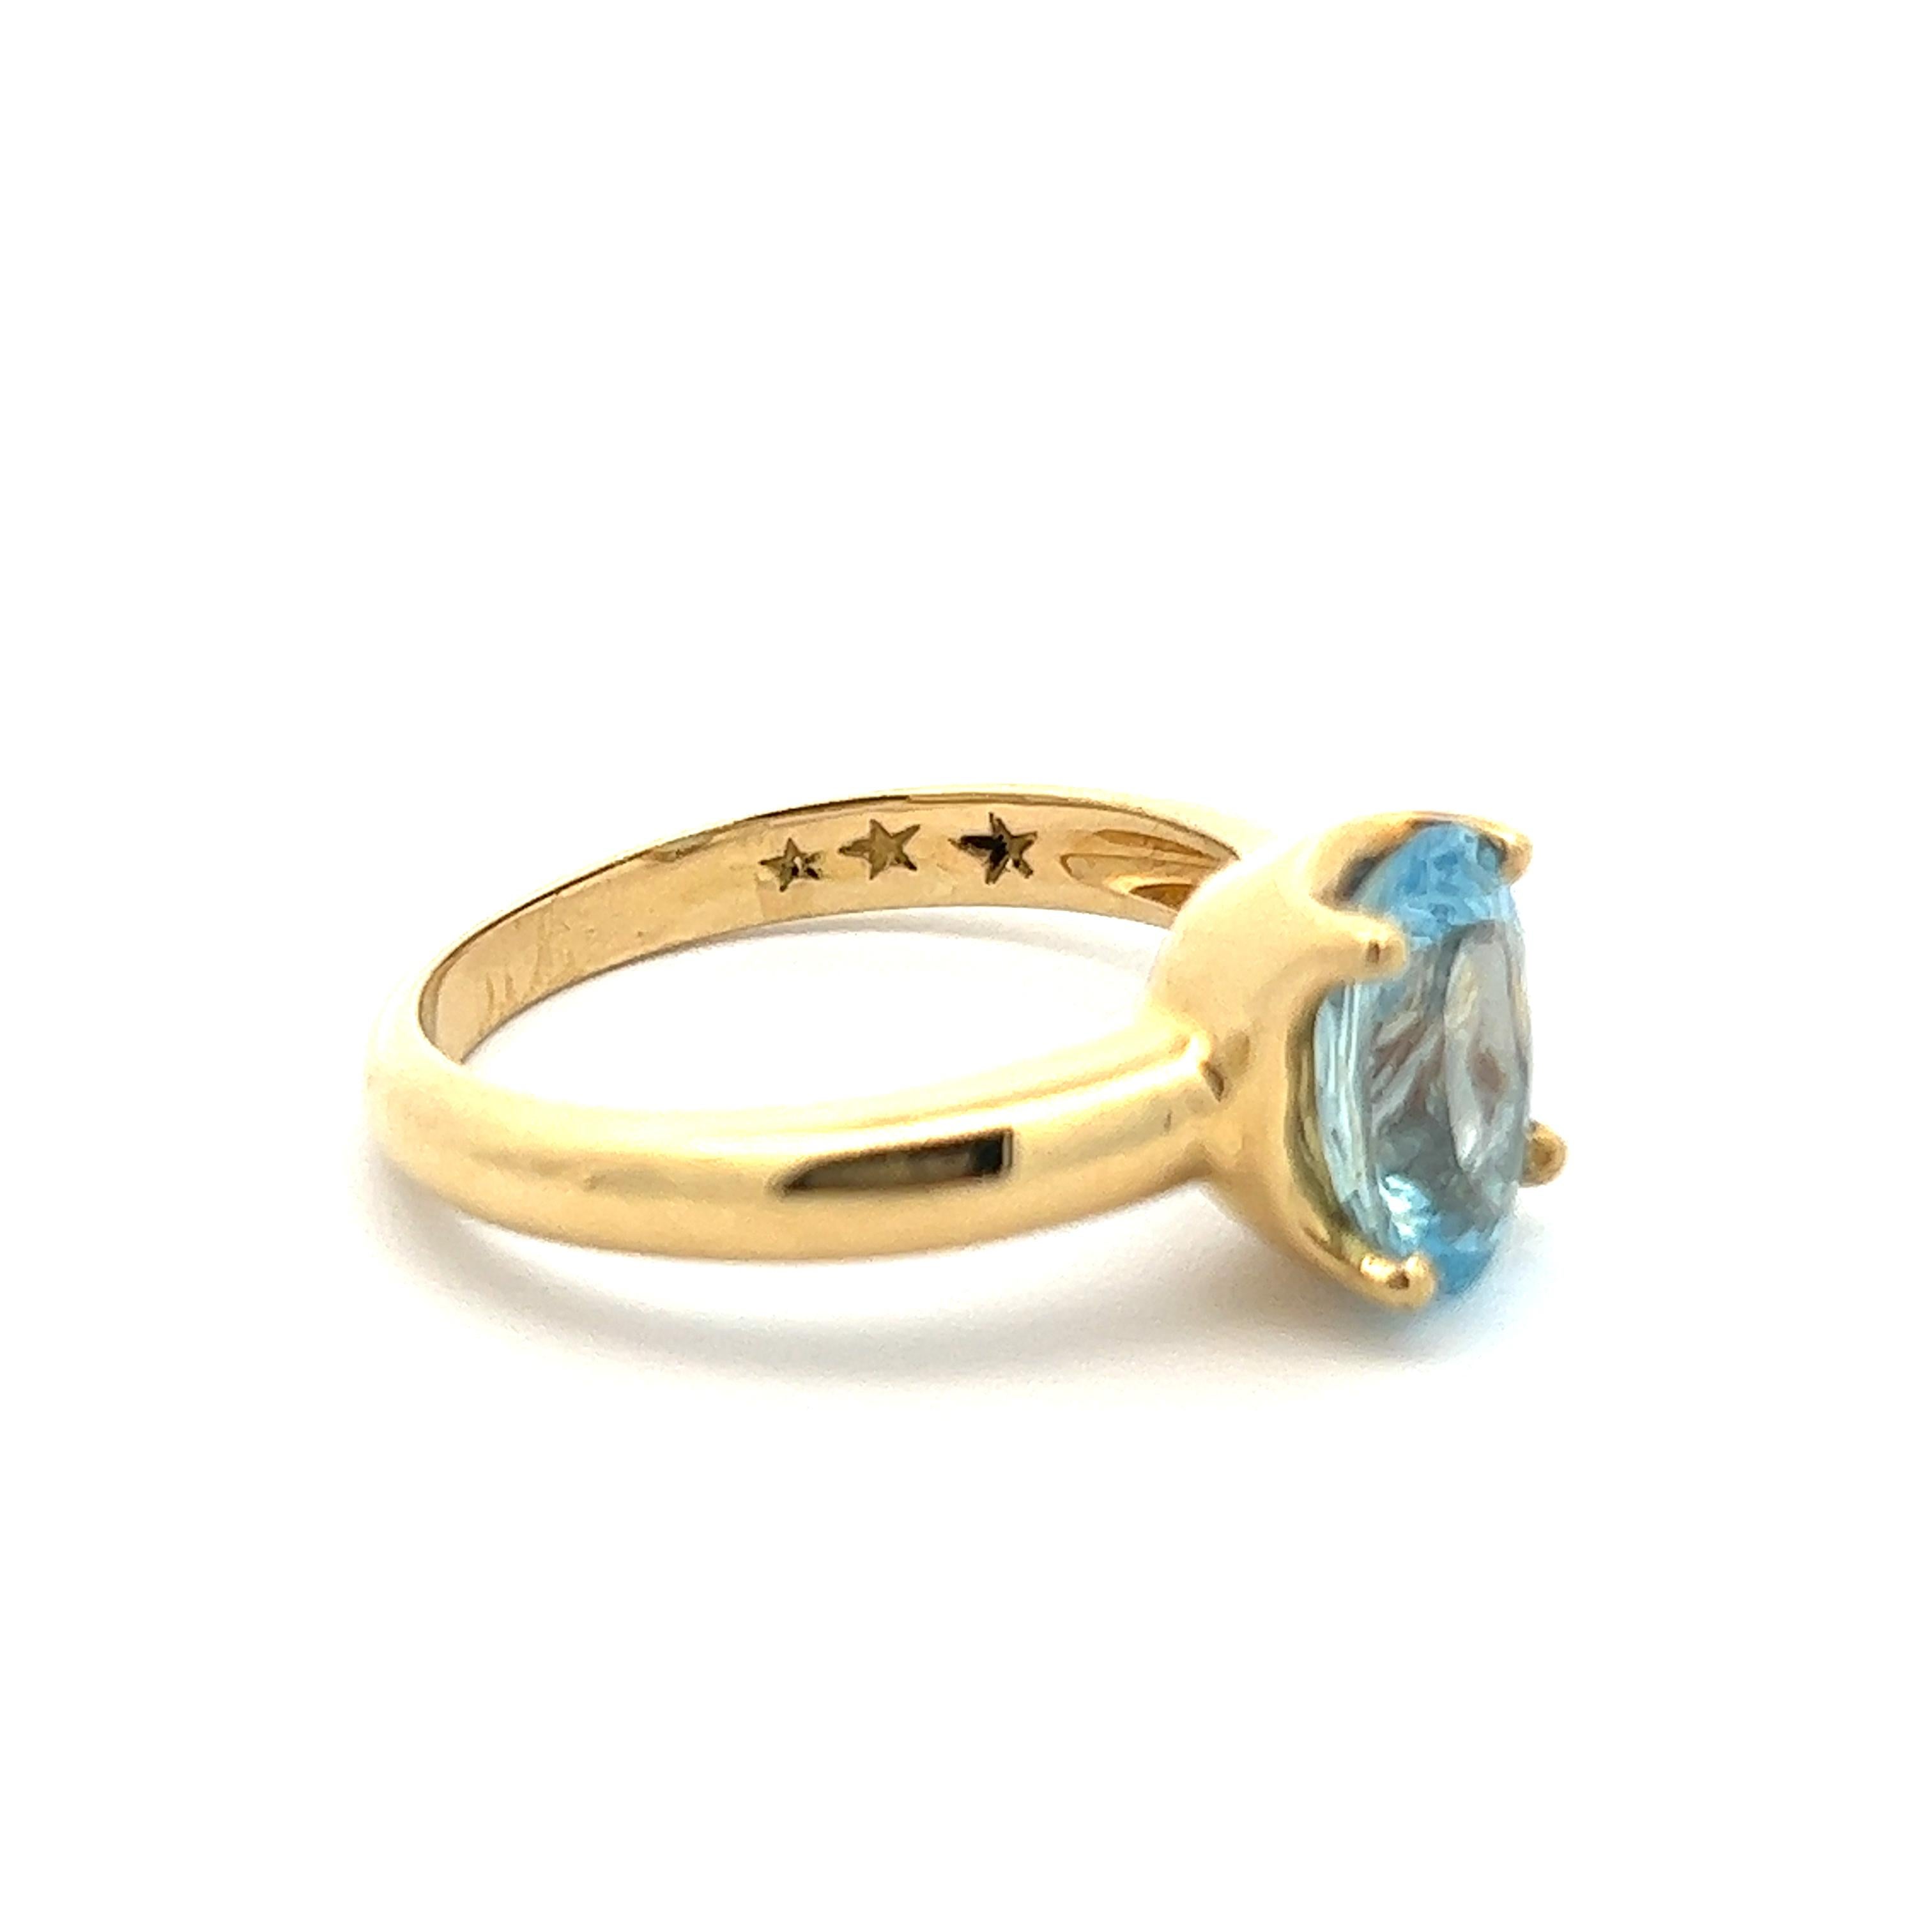 This 18K yellow gold vintage ring from H. Stern features a stunning oval cut aquamarine. H. Stern is the best known luxury jewelry brand first founded in Brazil in 1945 by Hans Stern.  Even though the brand initially specialized in precious stones,